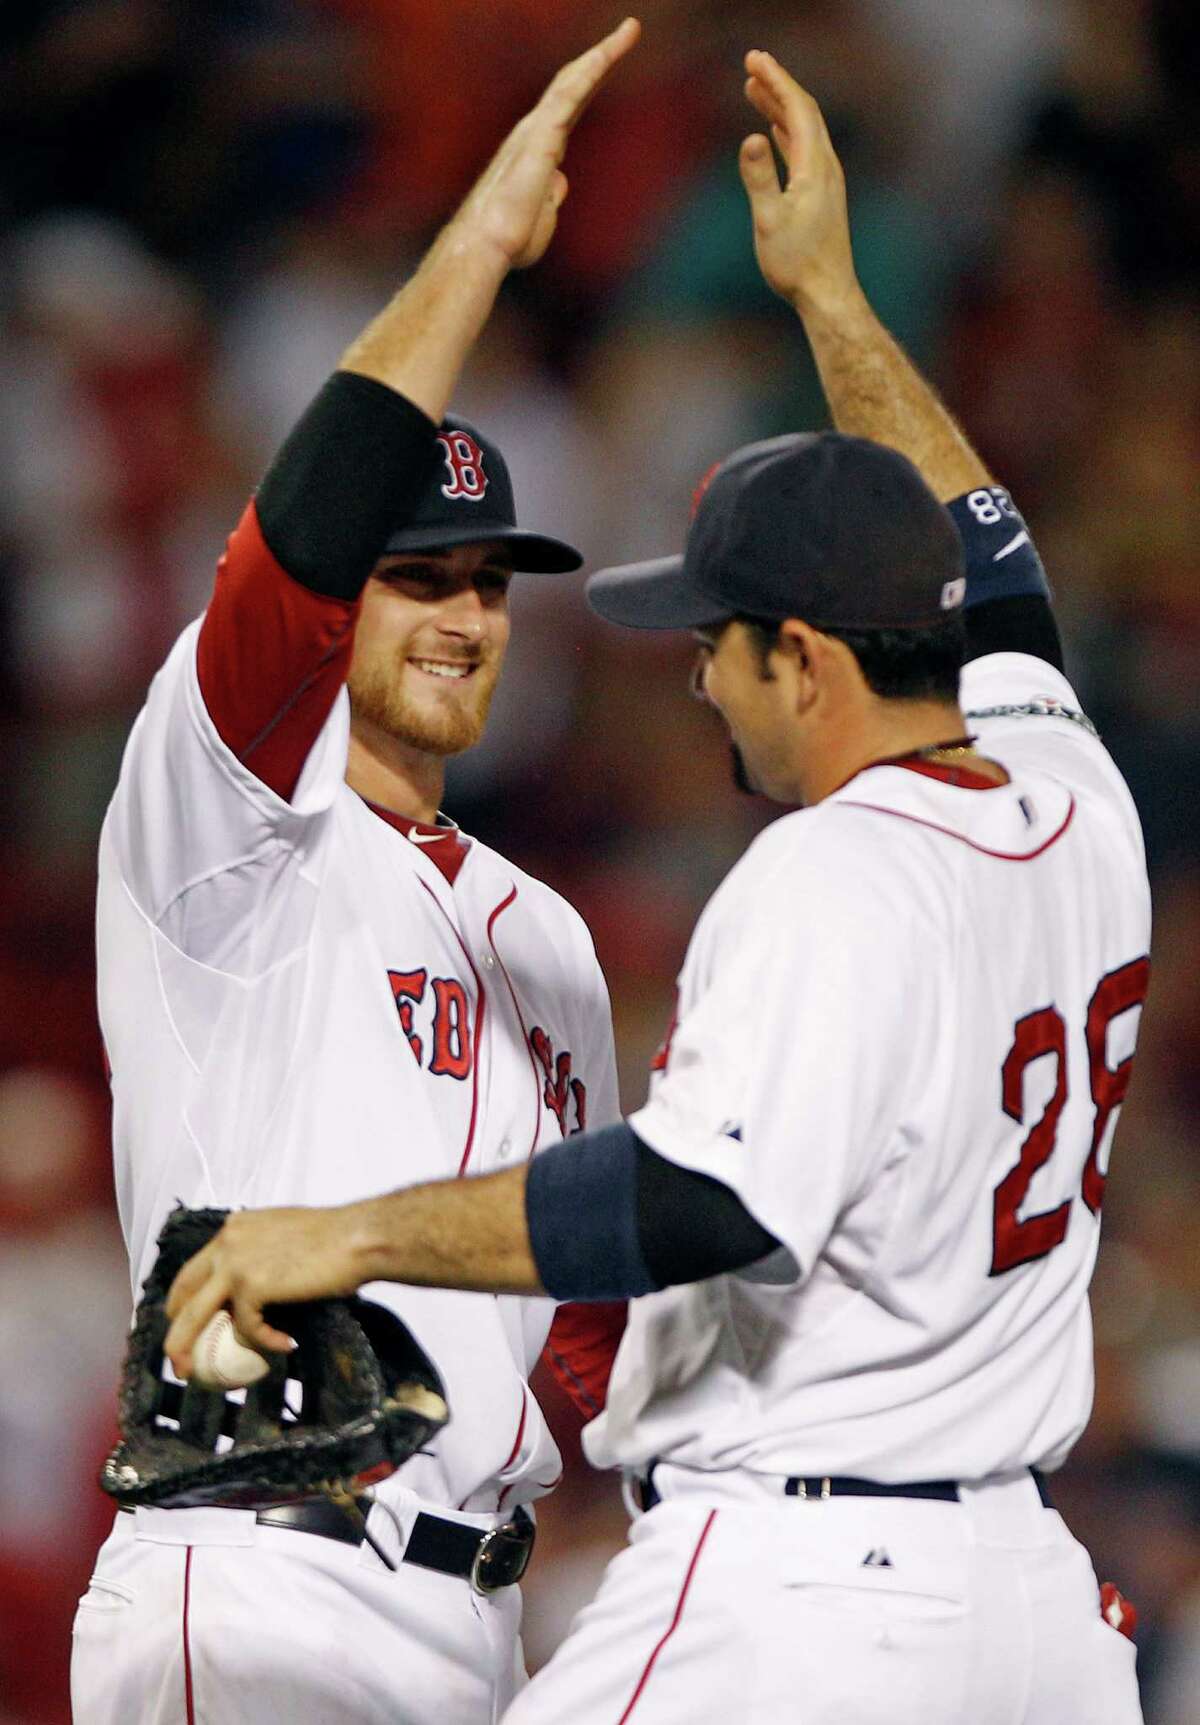 Boston Red Sox third baseman Will Middlebrooks, left, is congratulated by Adrian Gonzalez after their 6-5 win over the Miami Marlins in a baseball game at Fenway Park in Boston, Thursday, June 21, 2012.